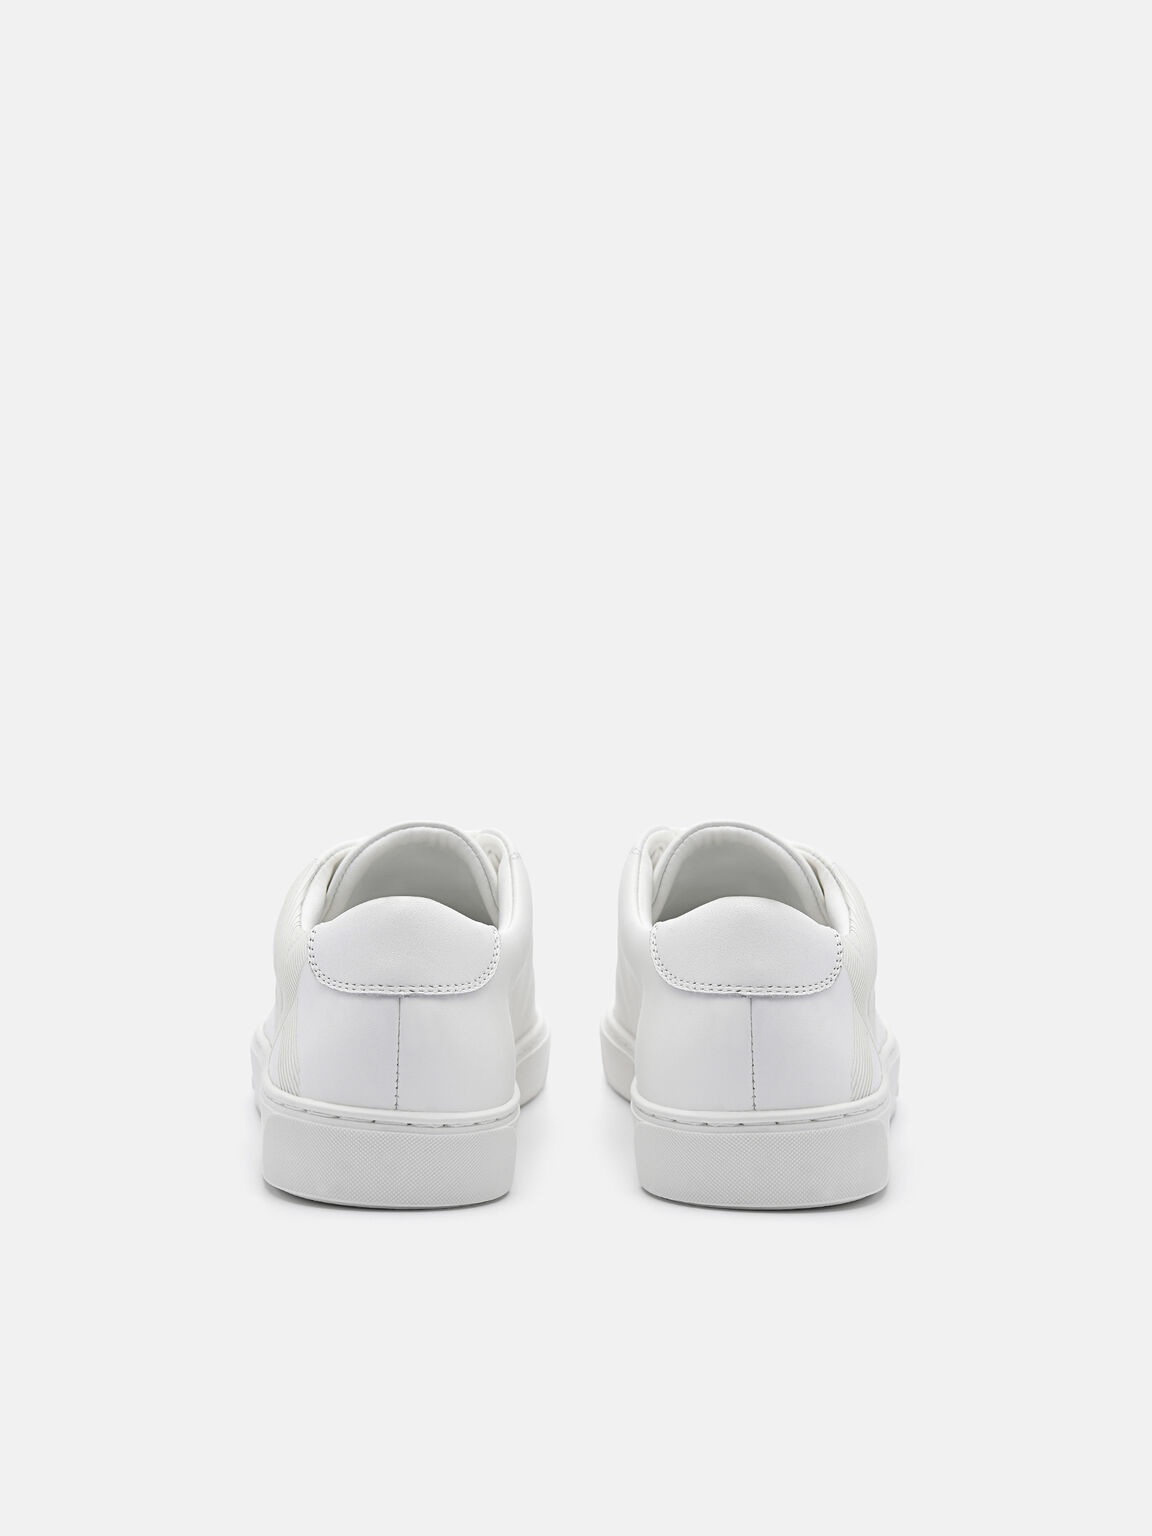 Giày sneakers cổ thấp Icon, Trắng